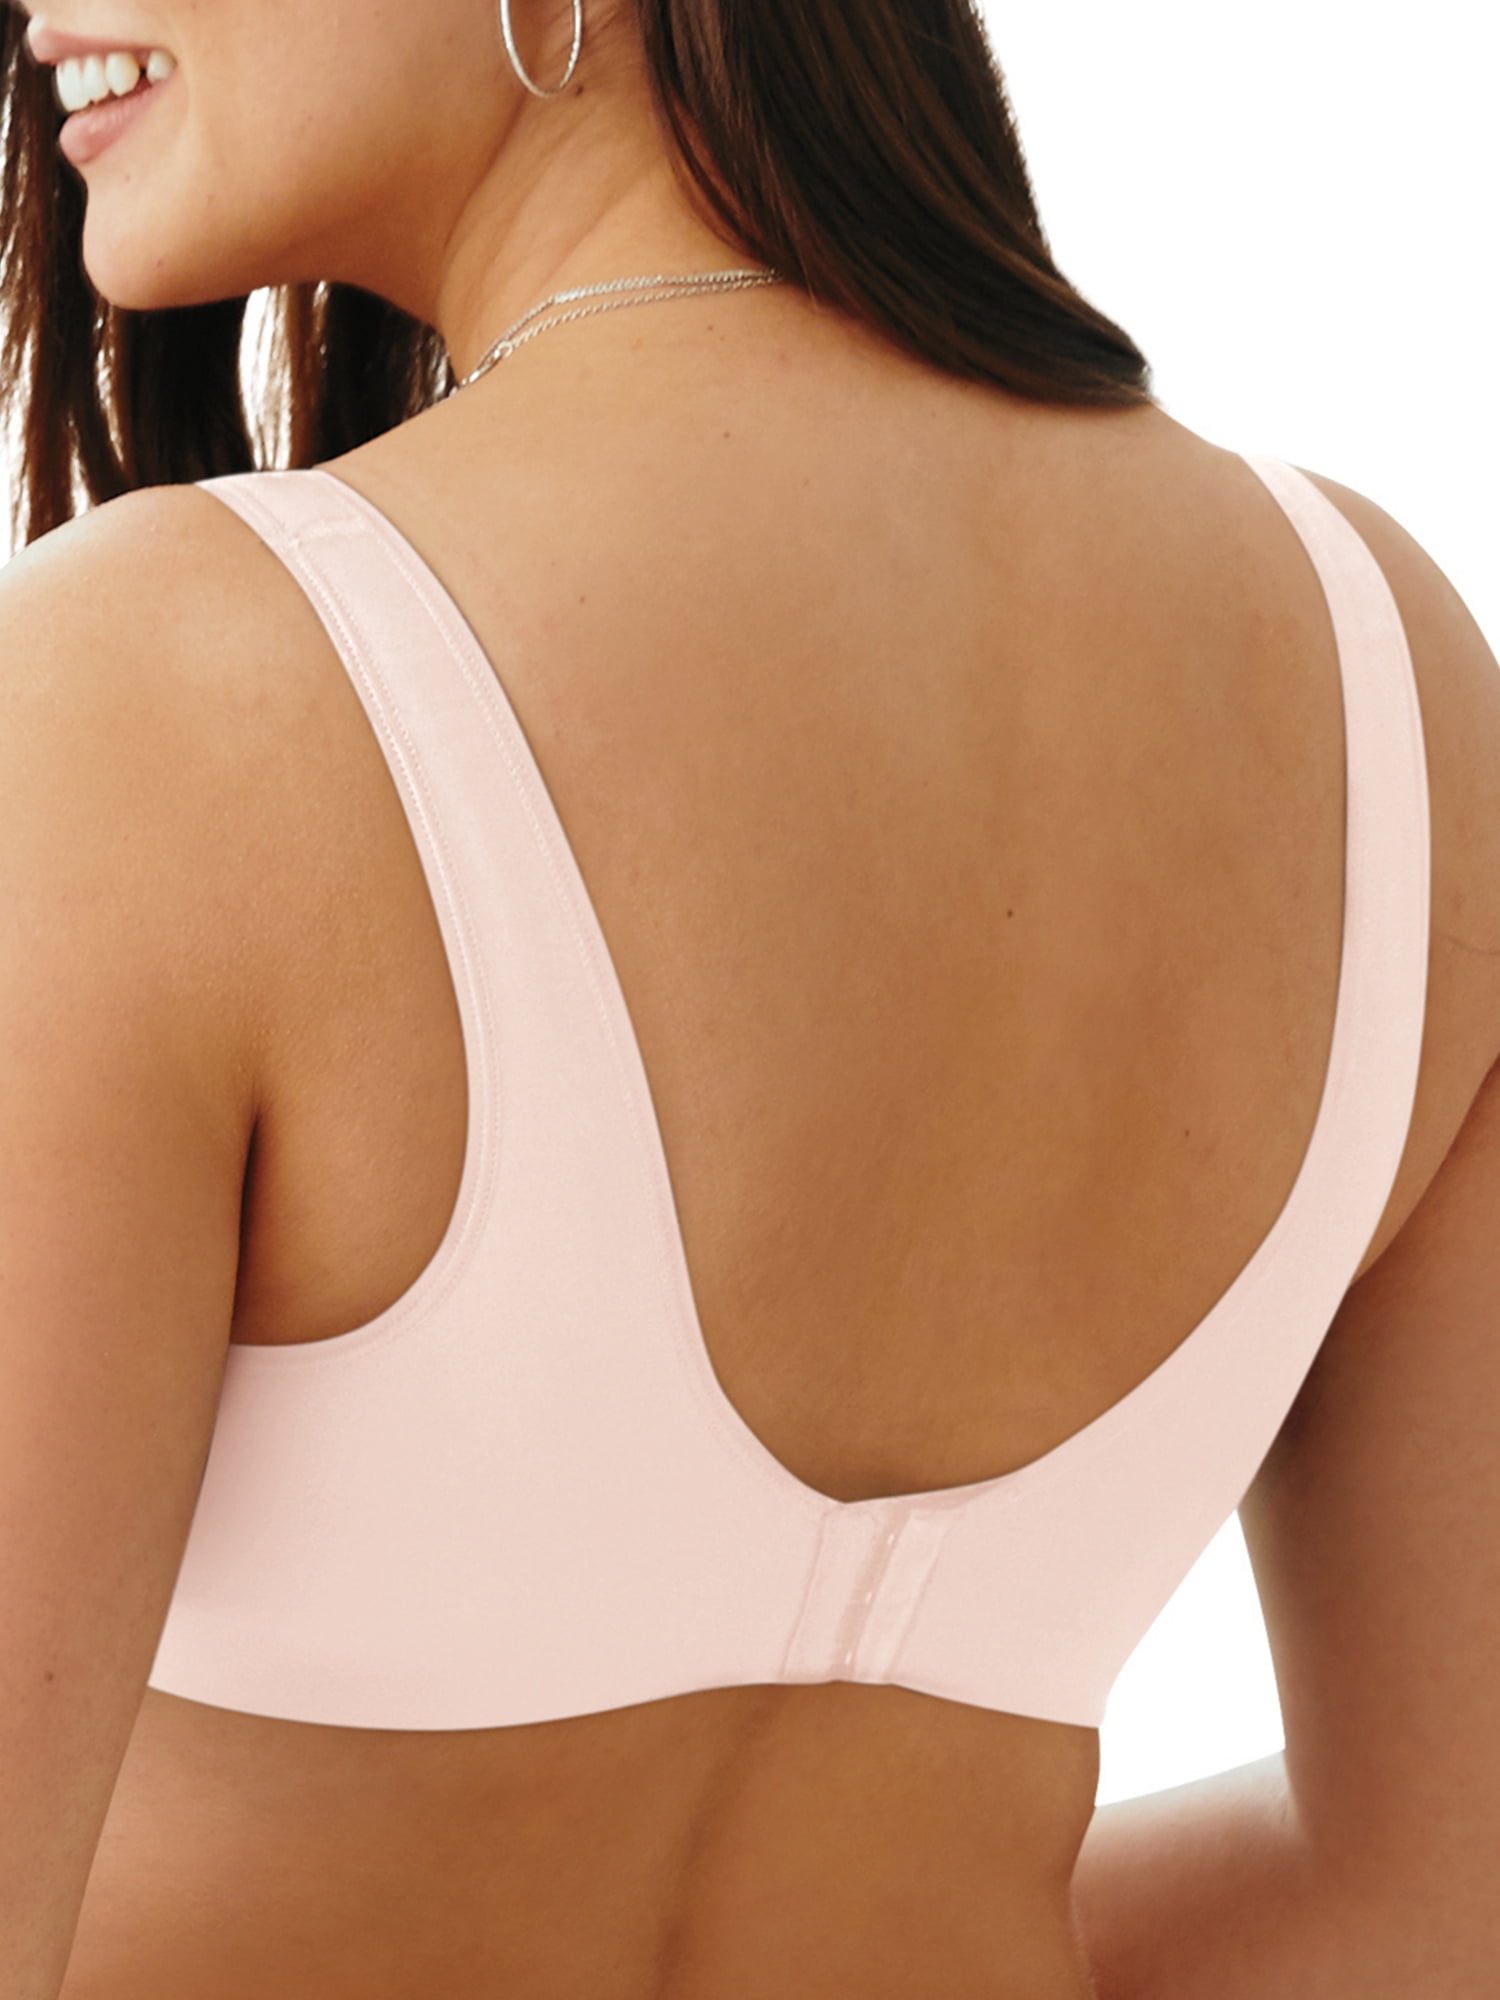 Hanes SmoothTec and ComfortFlex Fit and Wirefree Bra MHG556 in